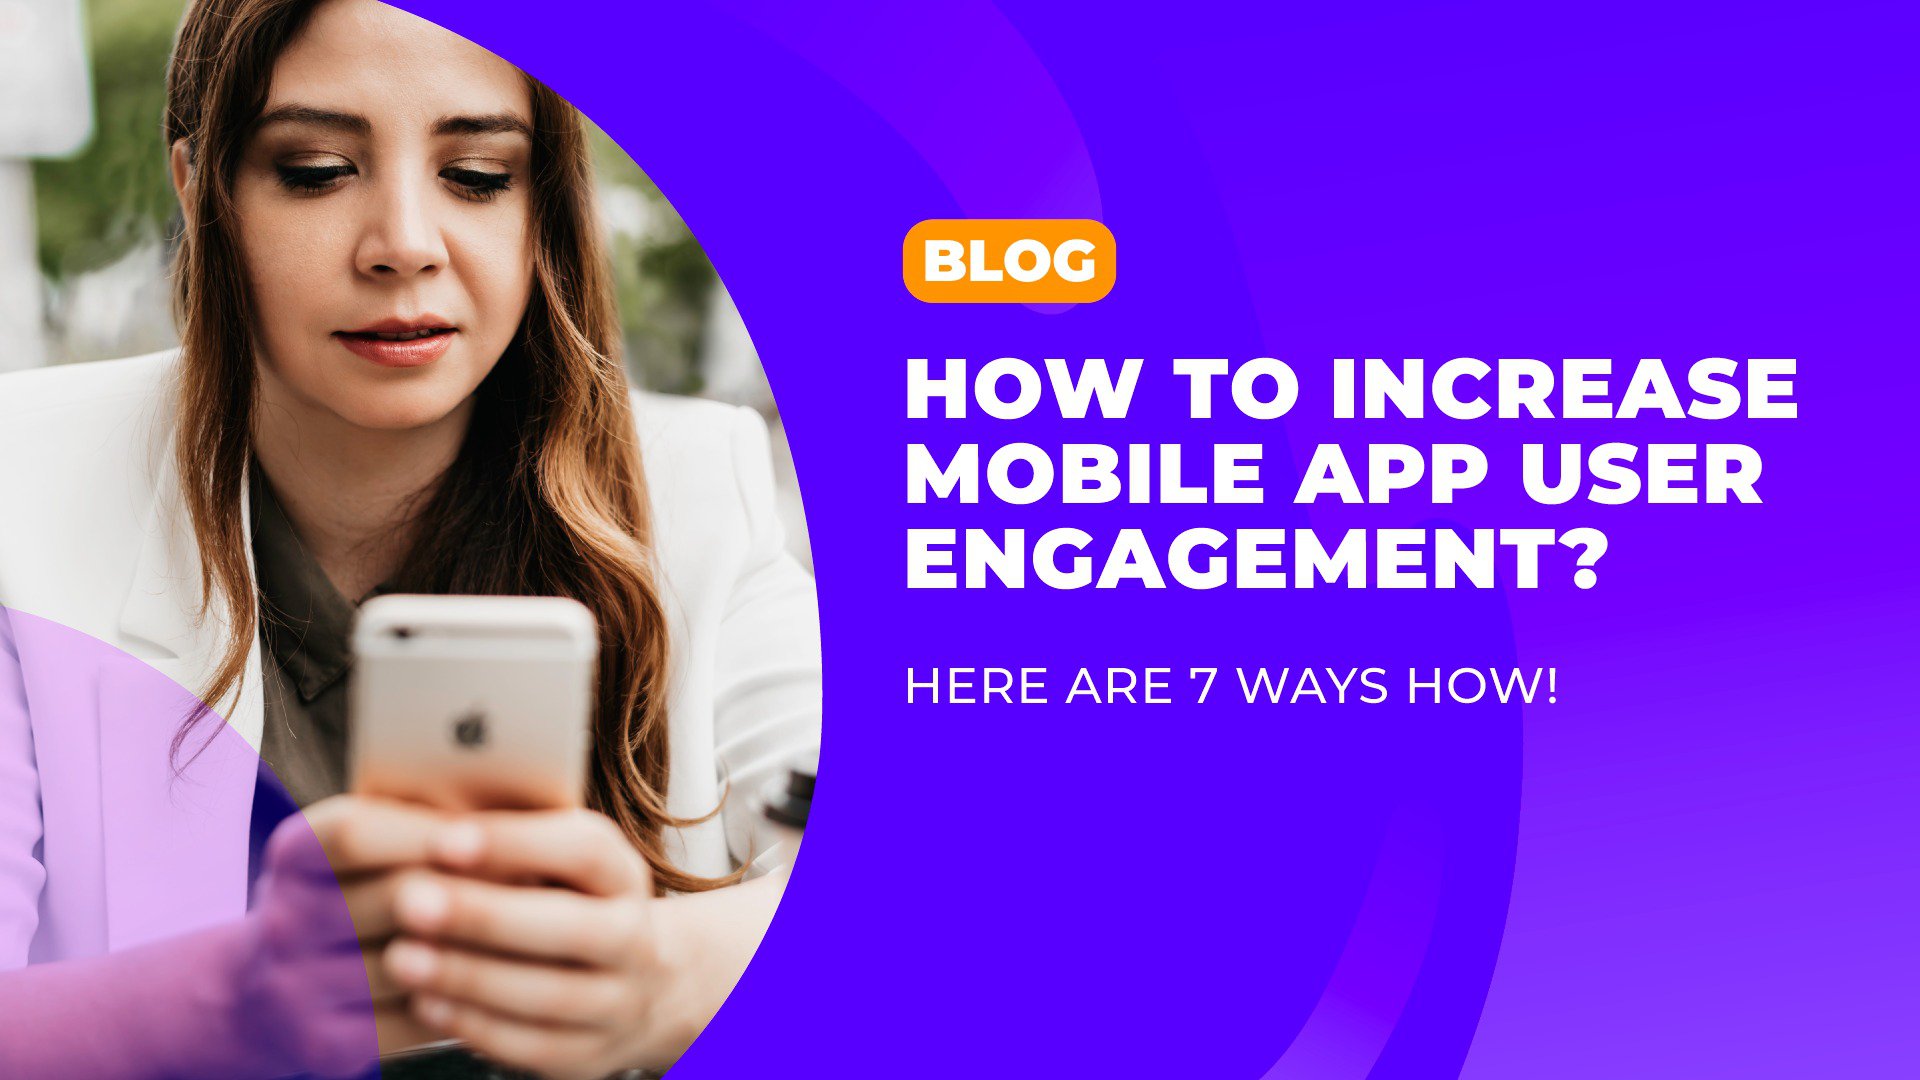 How to increase mobile app user engagement? Here are 7 ways how! cover